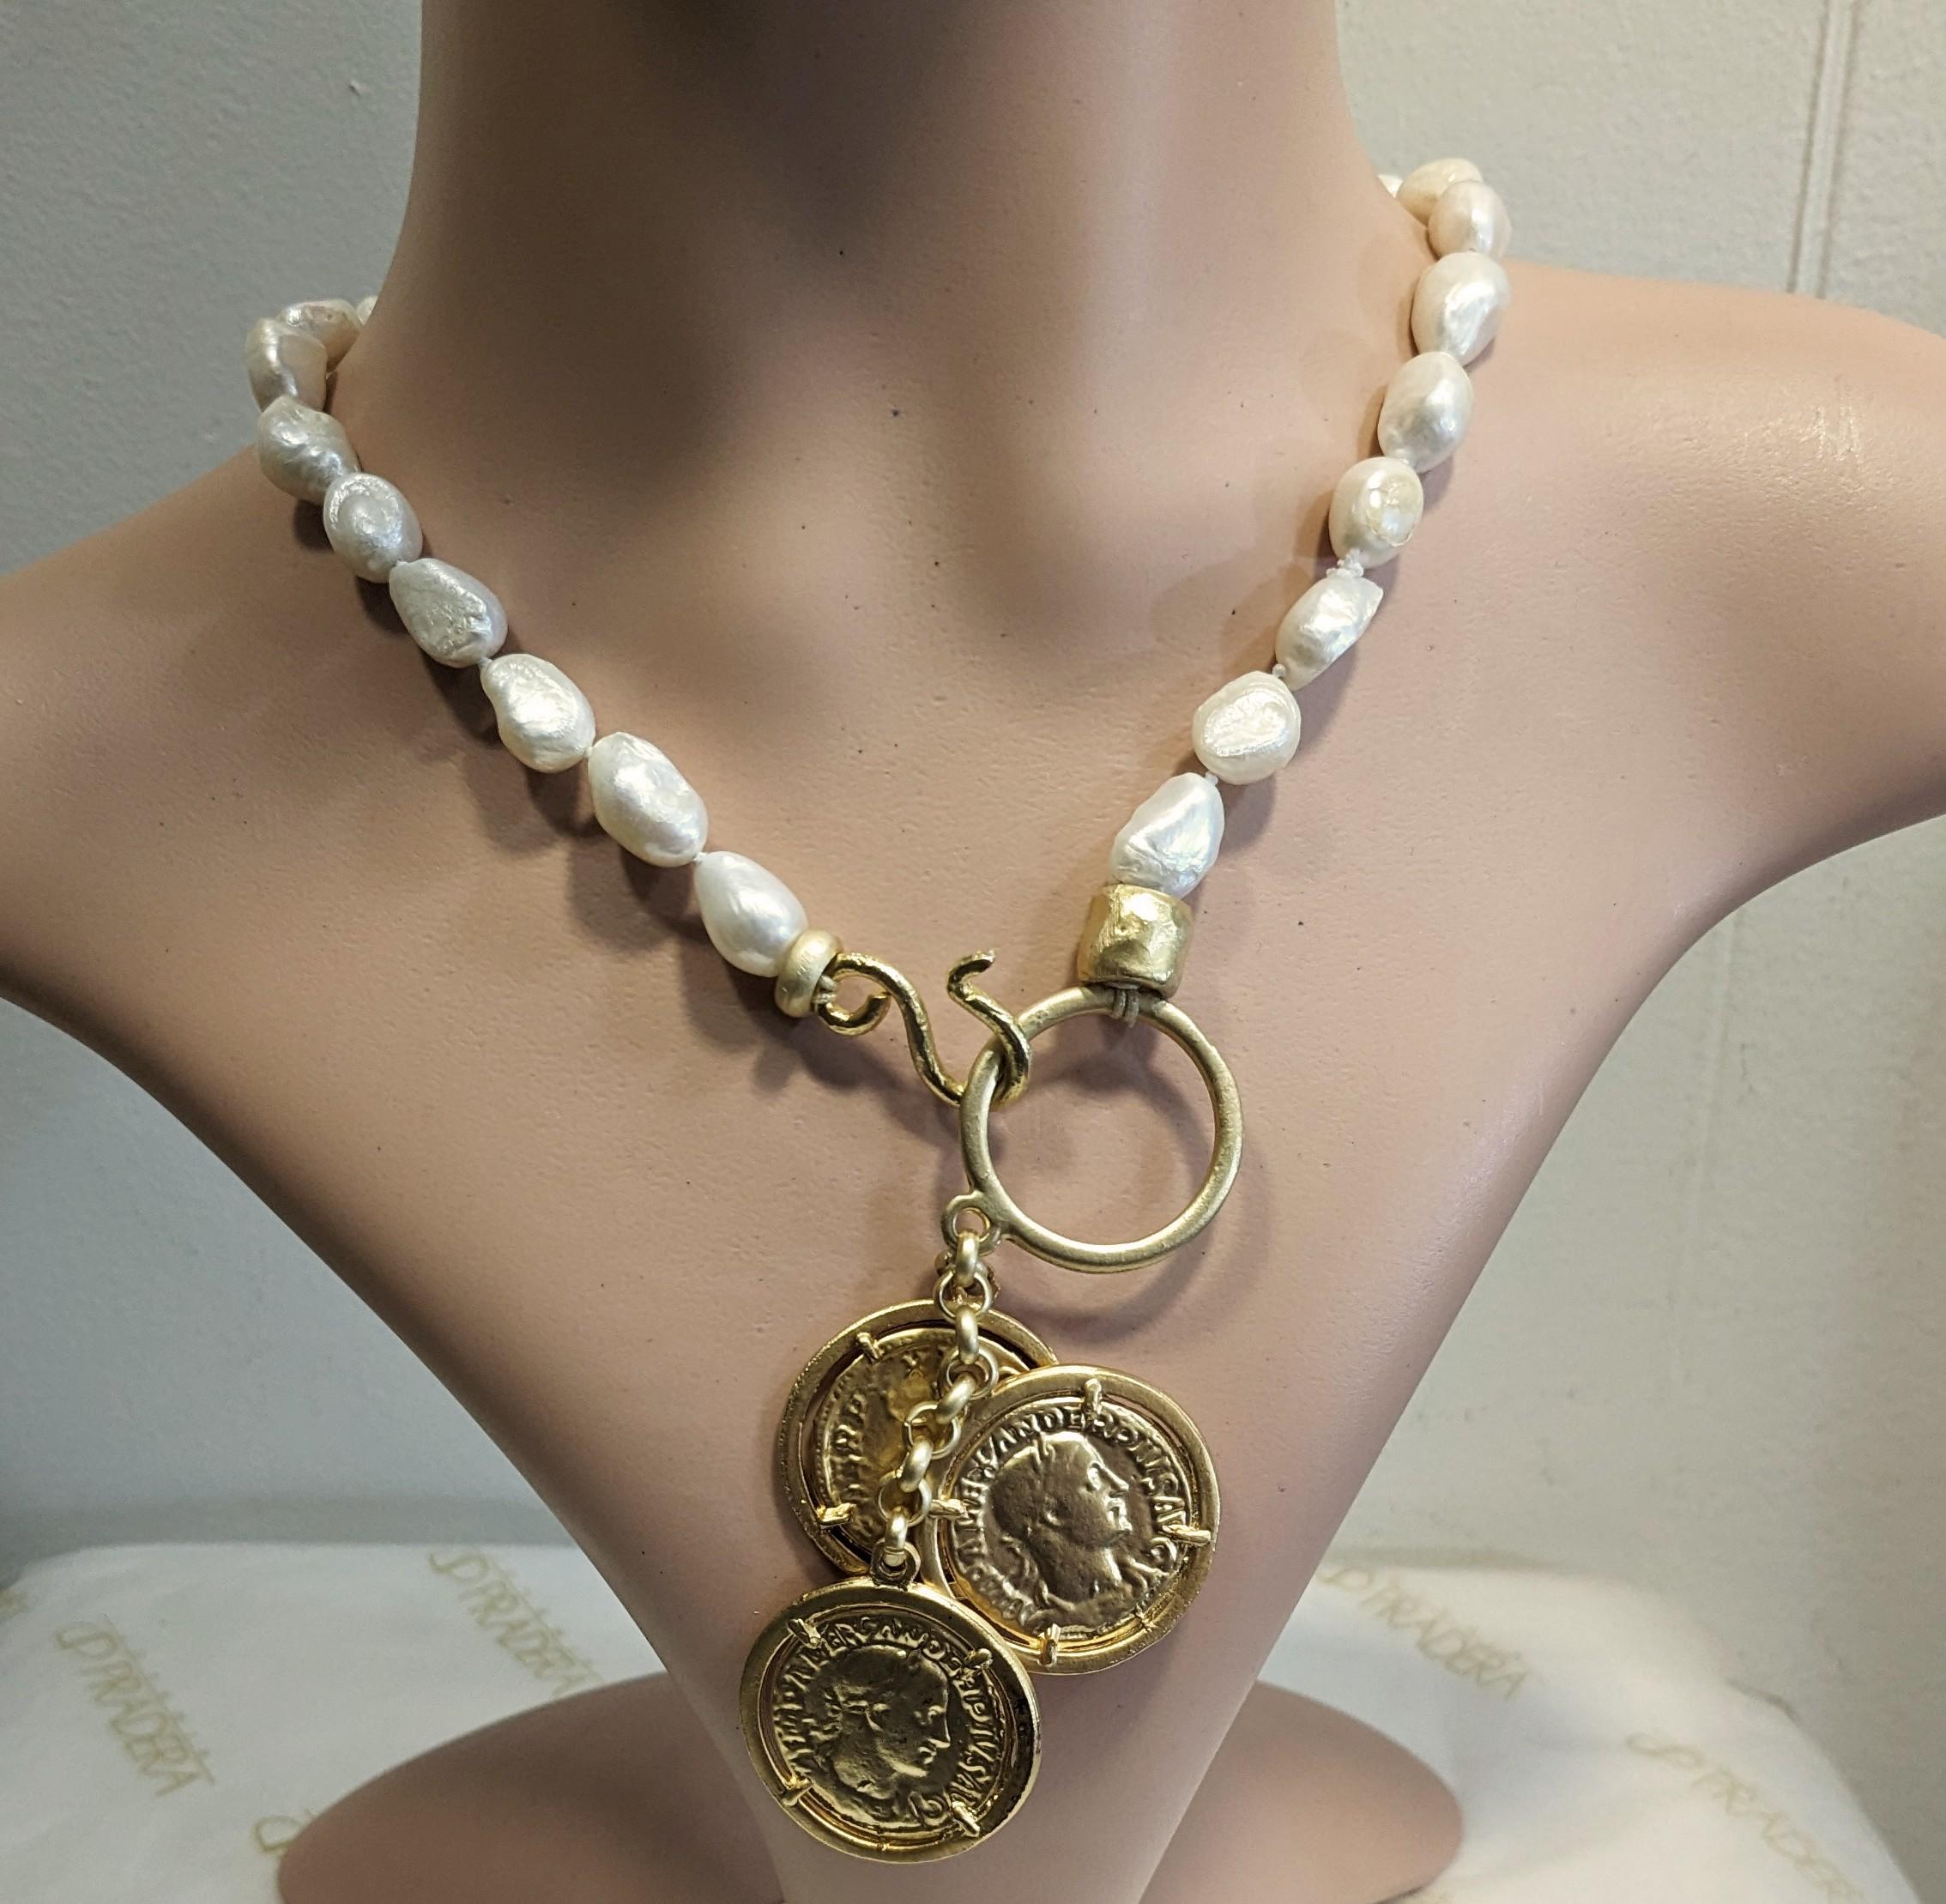 Women's  Short Necklace of White River Pearls with Central Hoop and Trio of Coins For Sale